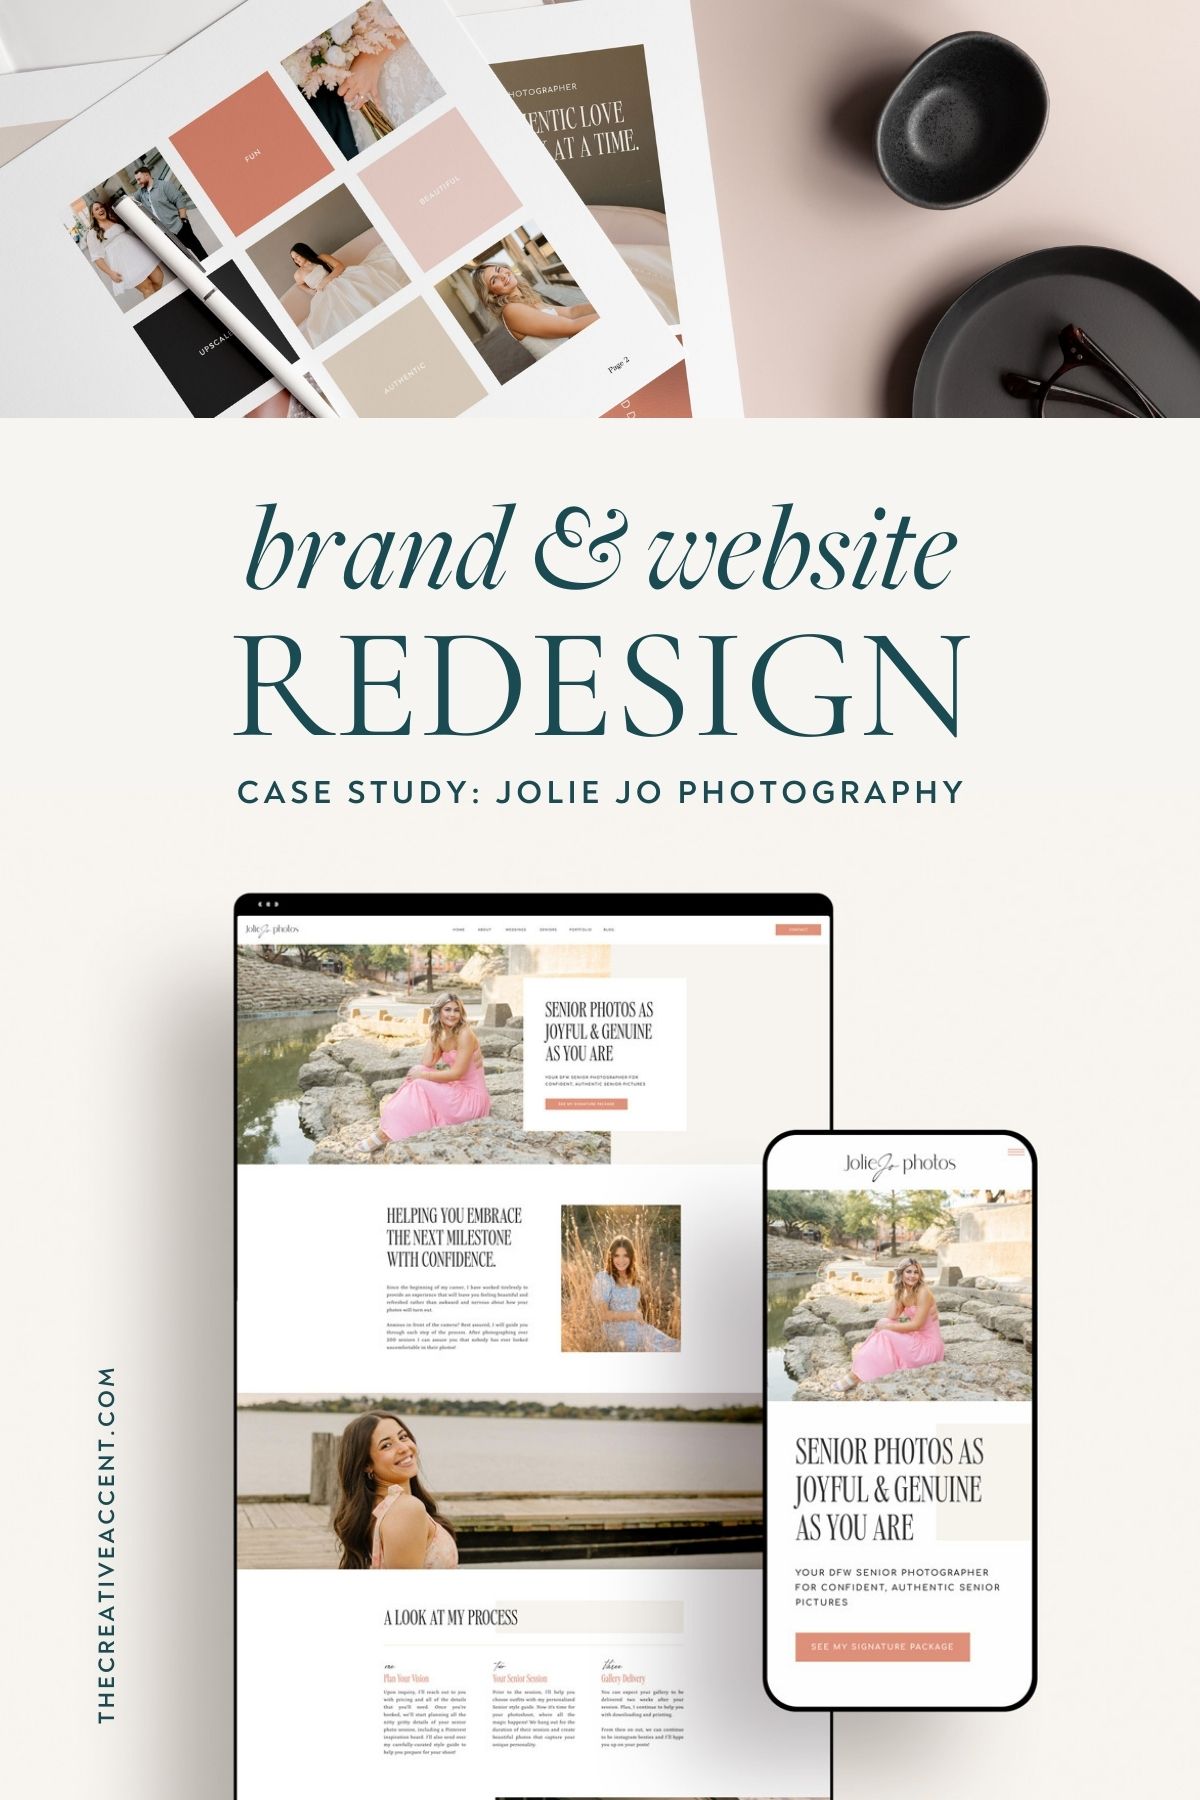 brand and website redesign case study for Jolie Jo Photography